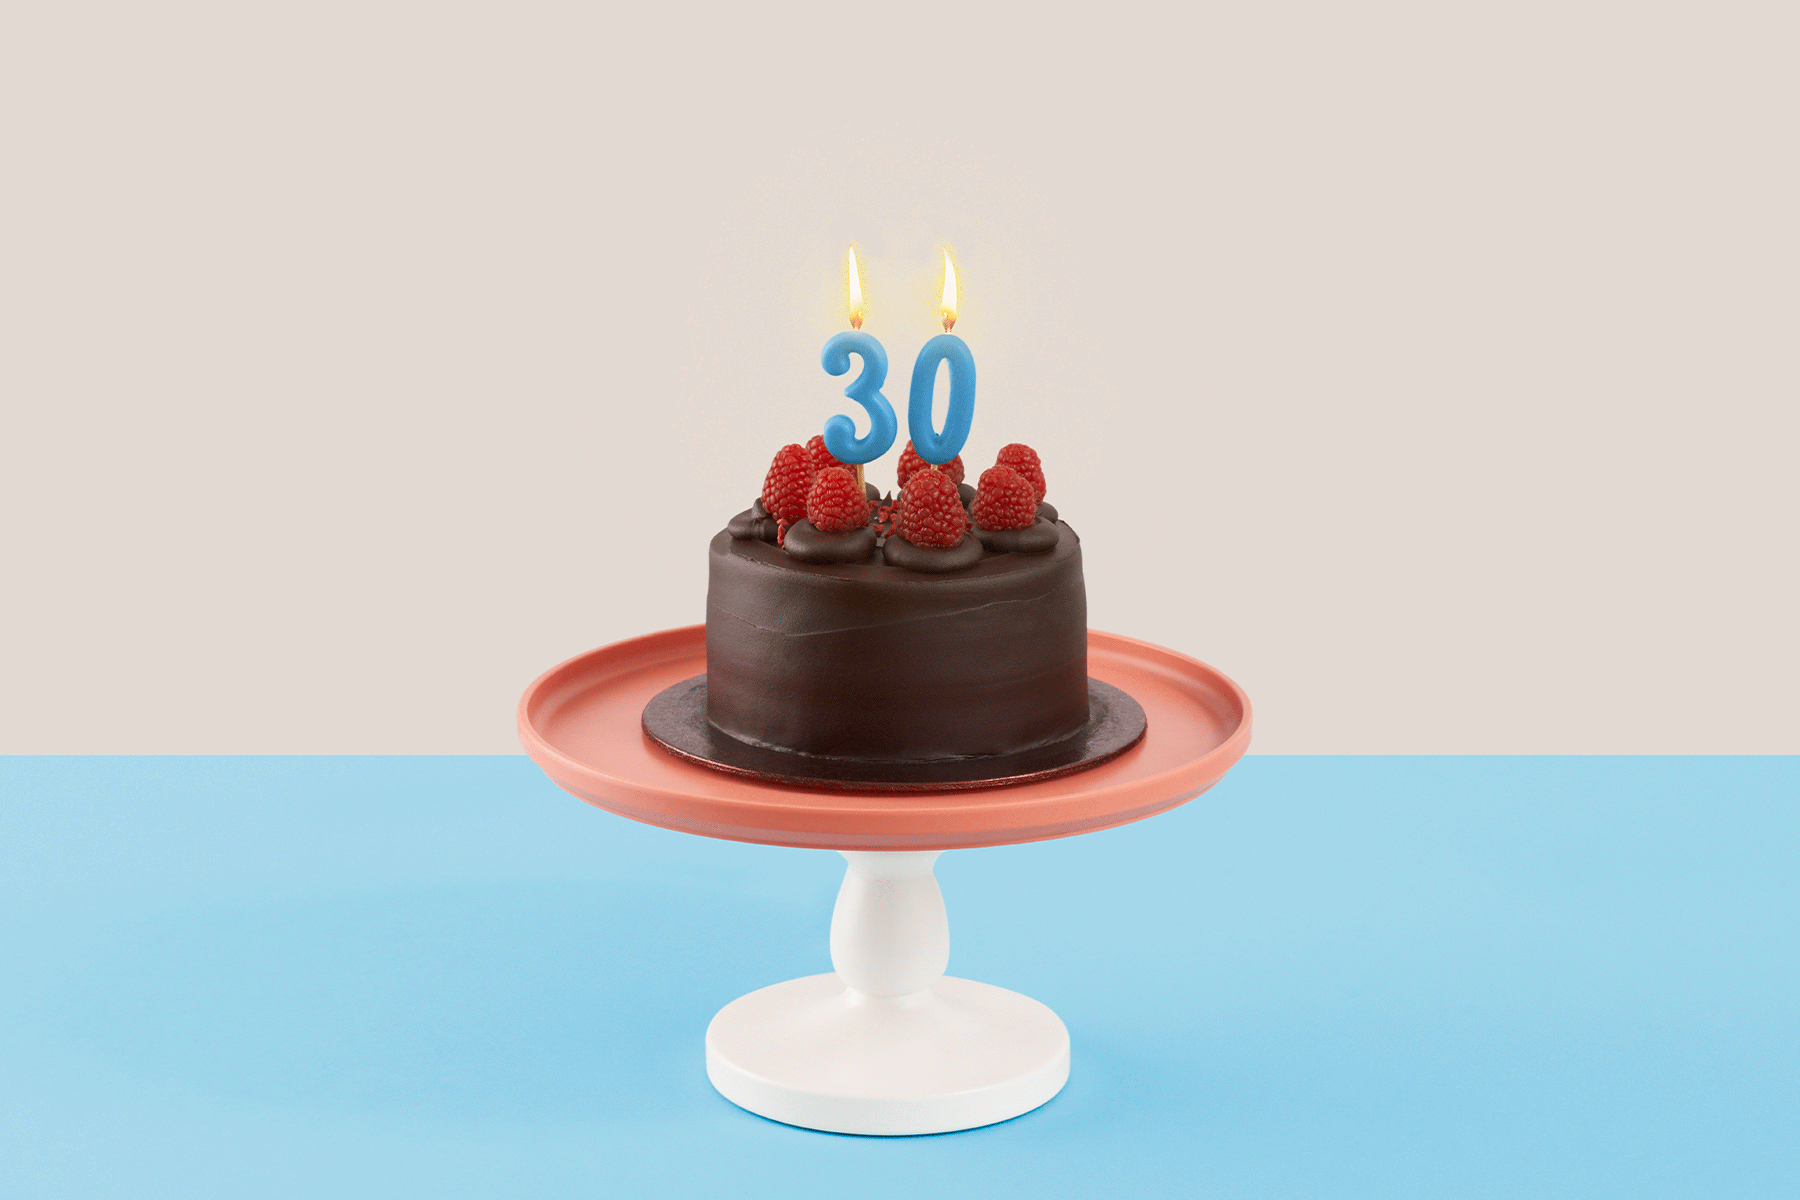 A photo of a chocolate cake with candles shaped like the number 30 atop; the candles flicker